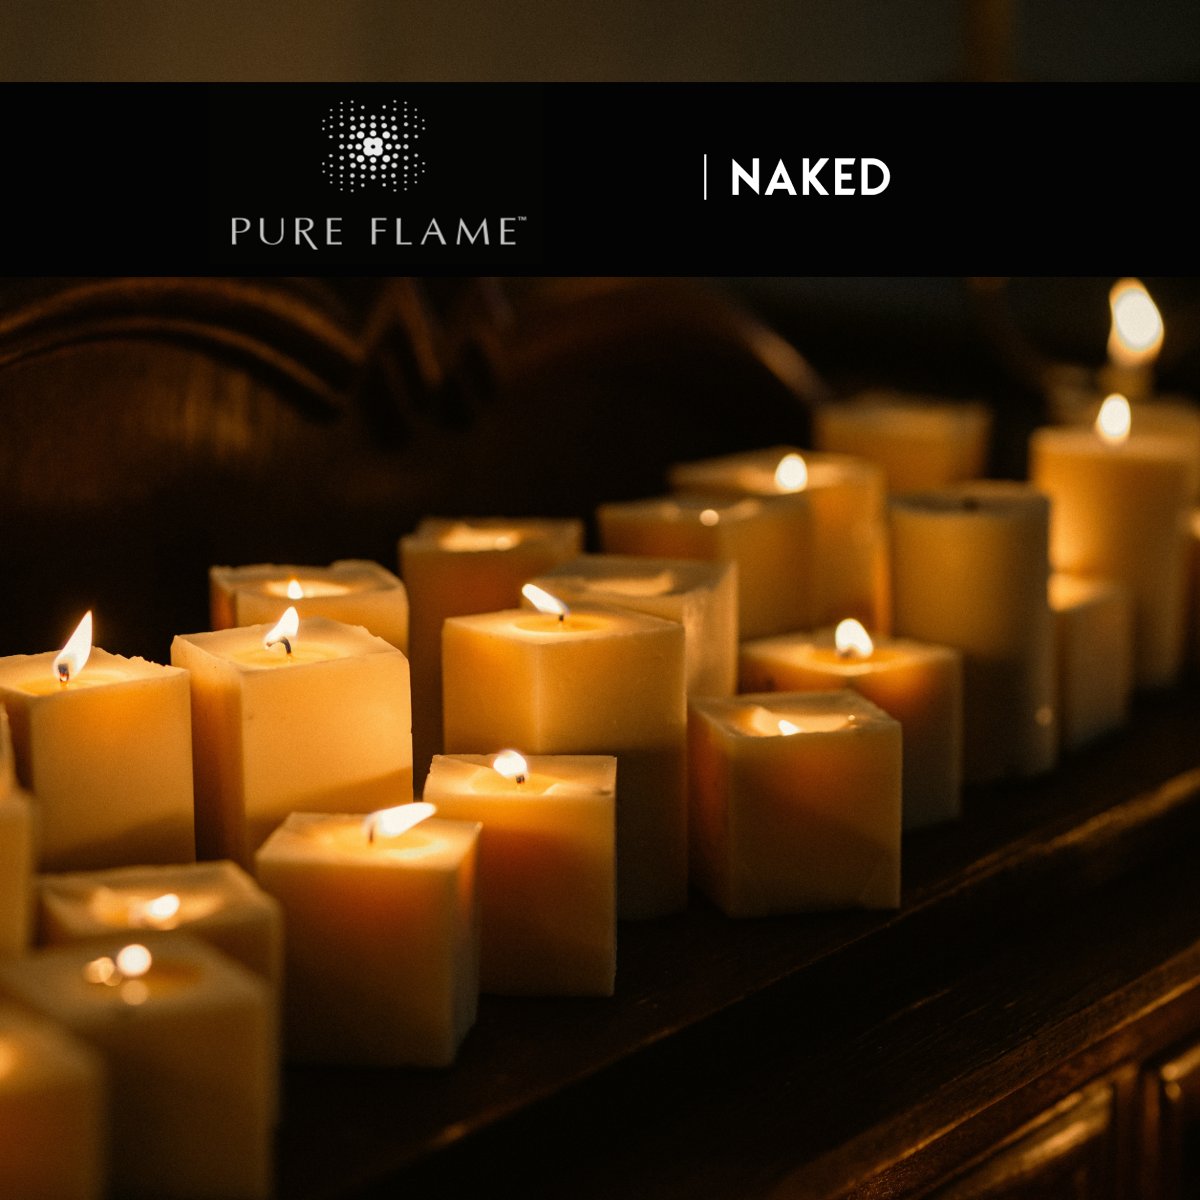 PURE FLAME Naked